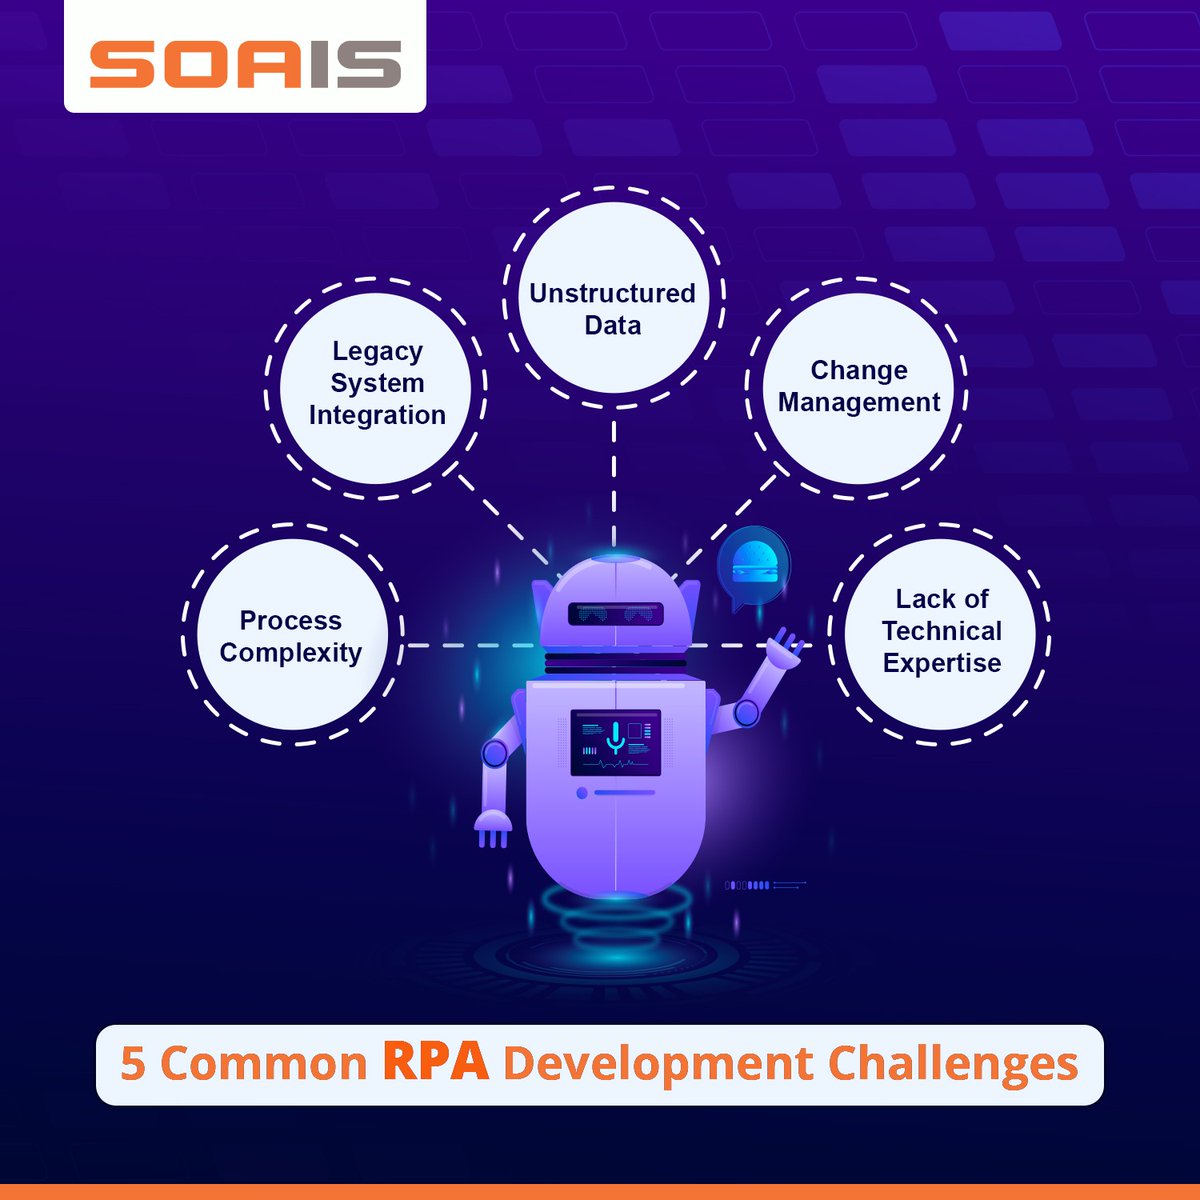 With careful planning, collaboration, and continuous improvement, many of these challenges can be effectively addressed to unlock the full potential of RPA.

#RPA #RPASoftware #RPADeveloper #RPAServices #RPASolutions #RPADevelopment #RPAChallenges #RPASoftware #SOAIS